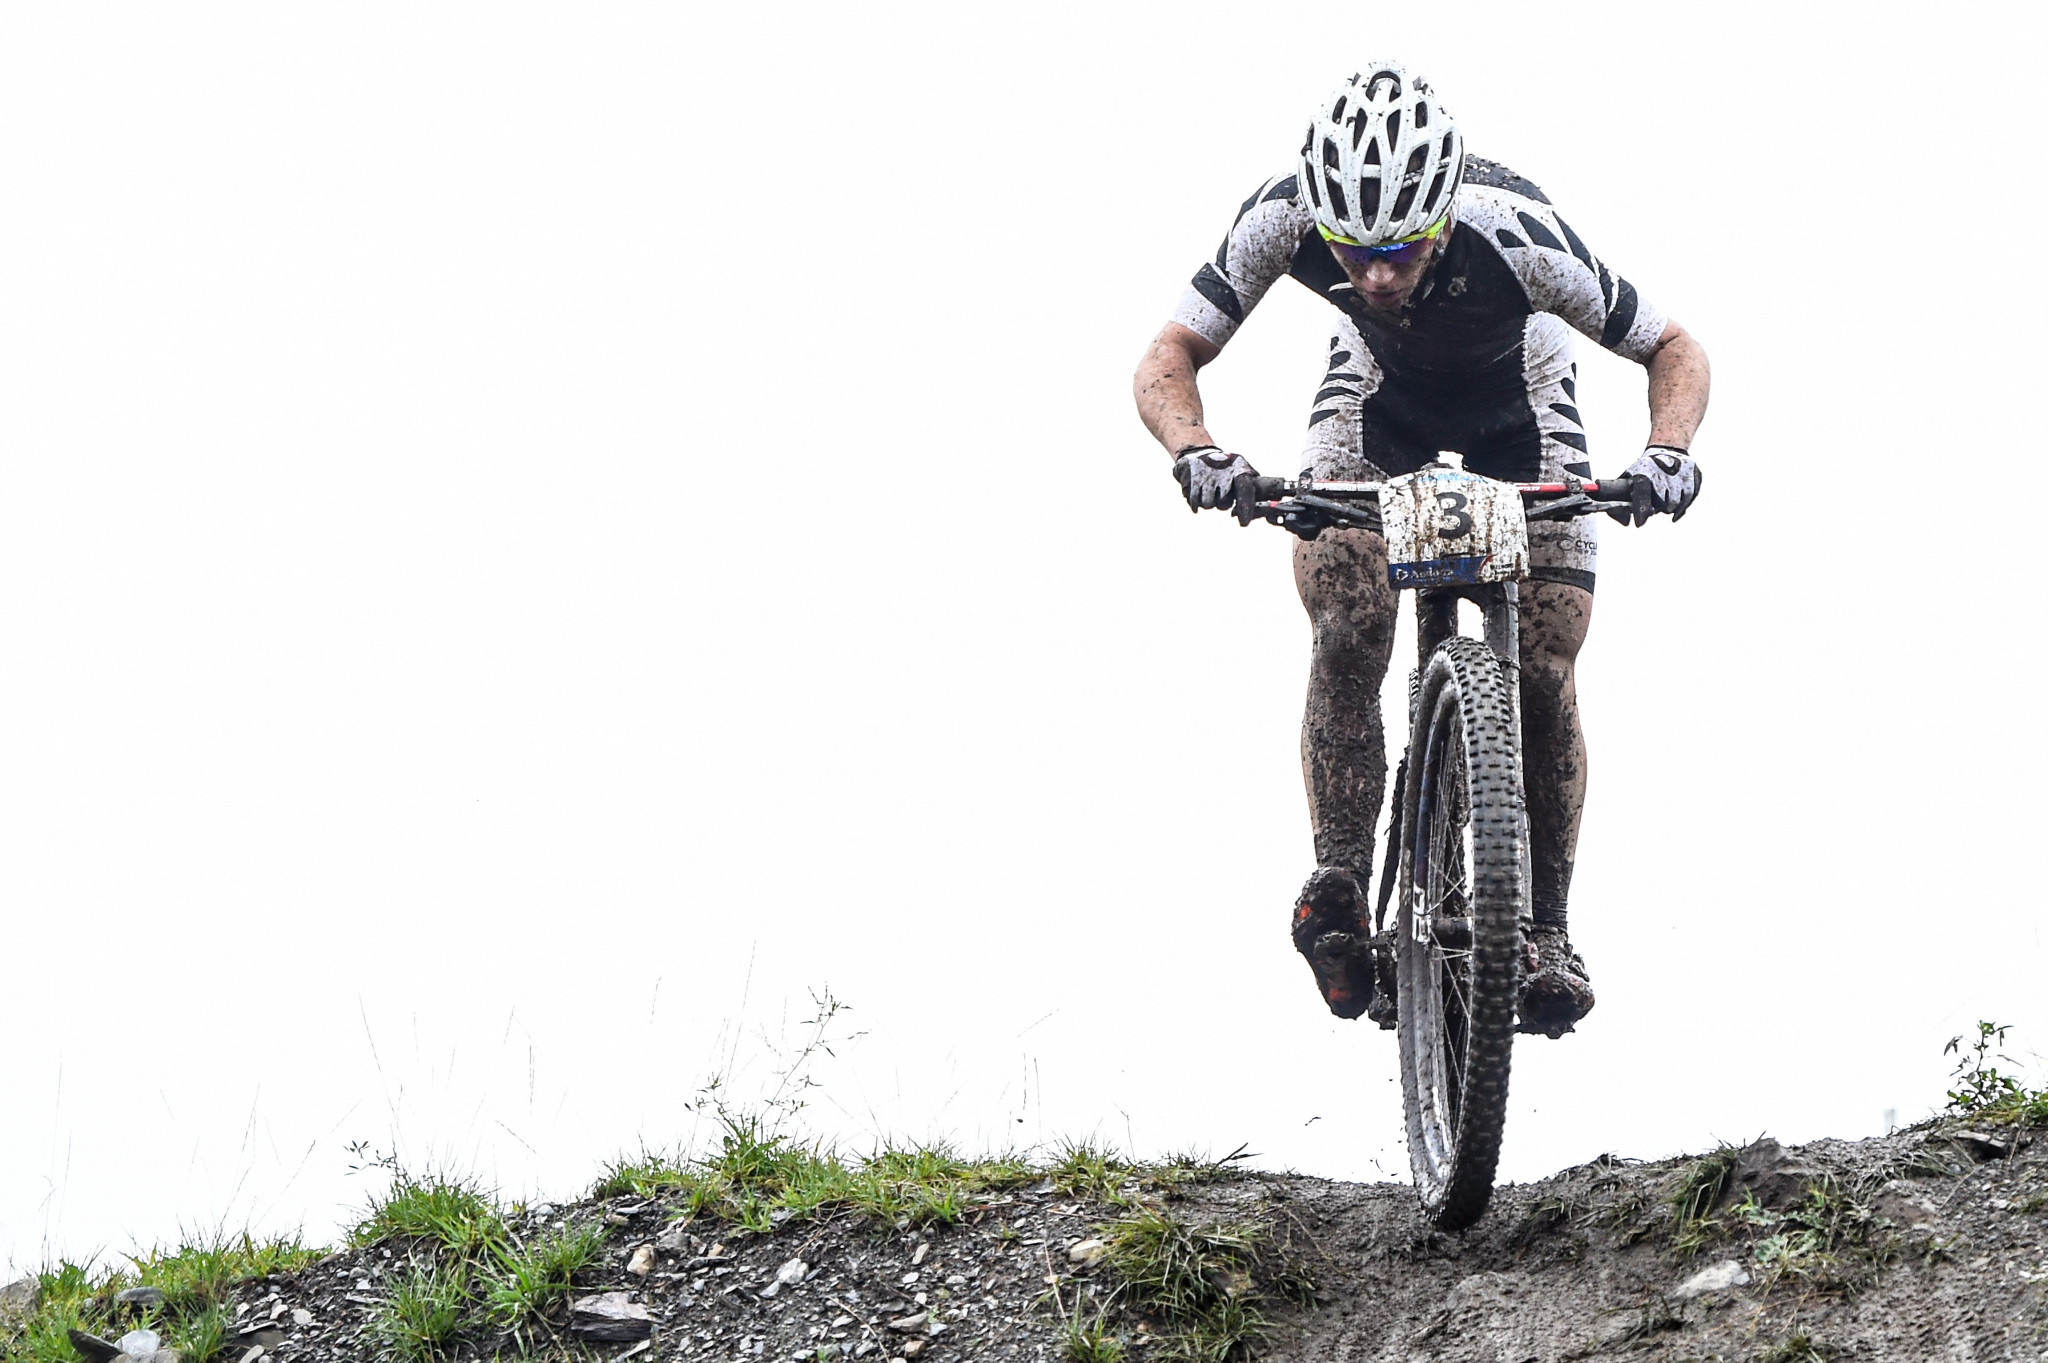 Cooper hoping for glory at Oceania Mountain Bike Championships